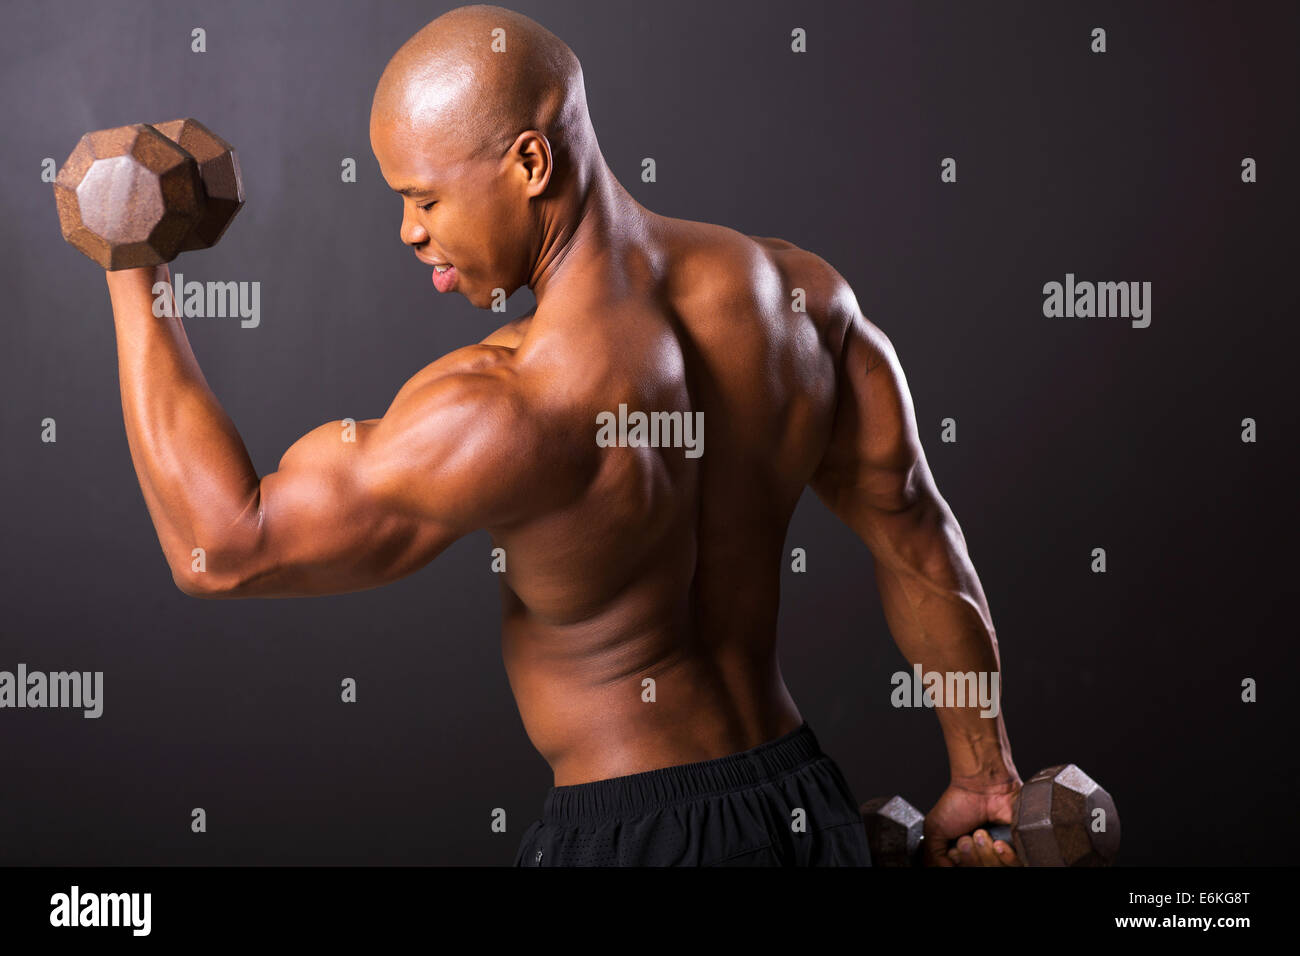 African male bodybuilder doing heavy weight exercise Stock Photo